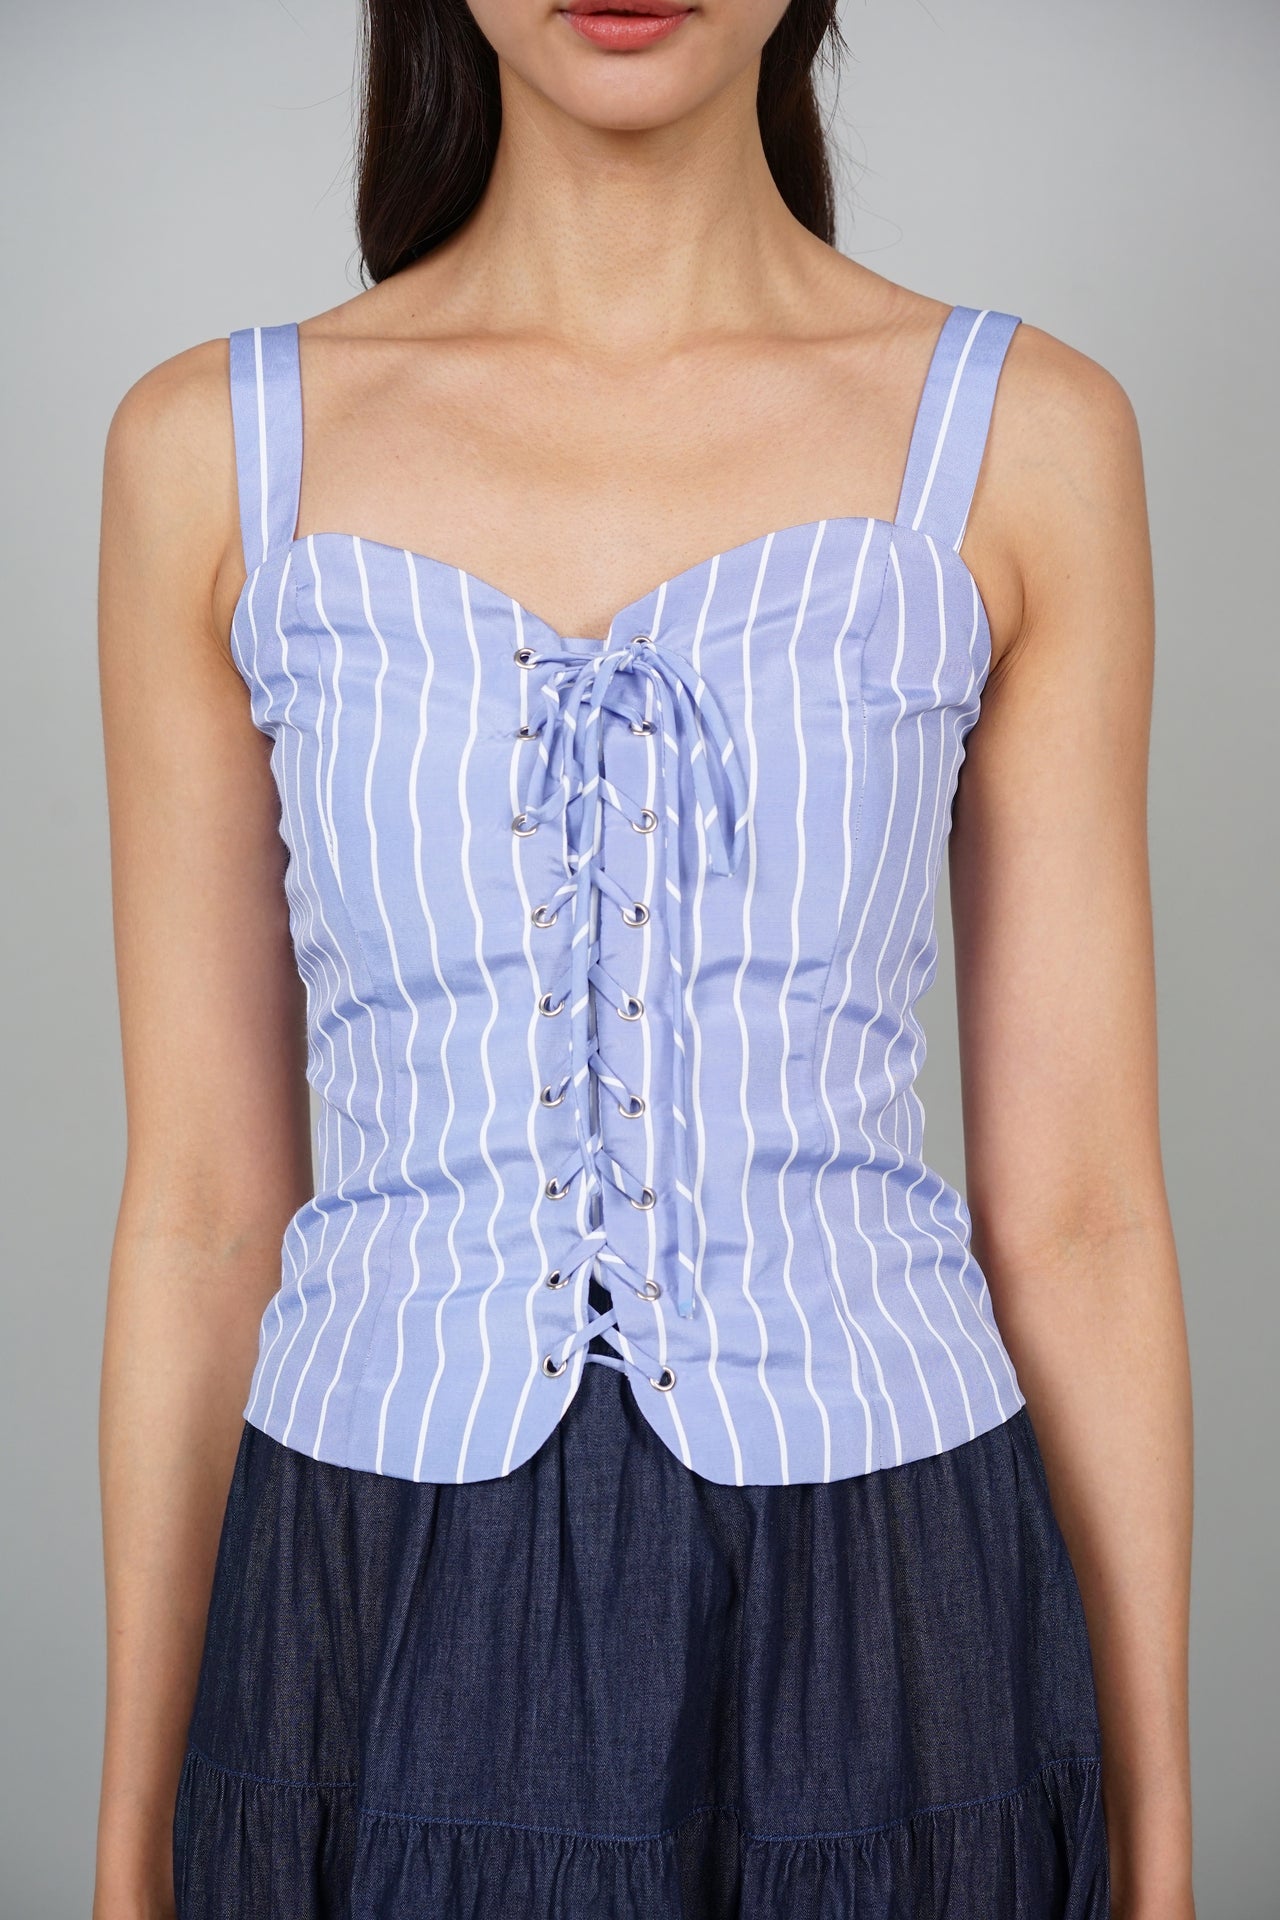 Selvi Lace-Up Top in Blue Stripes